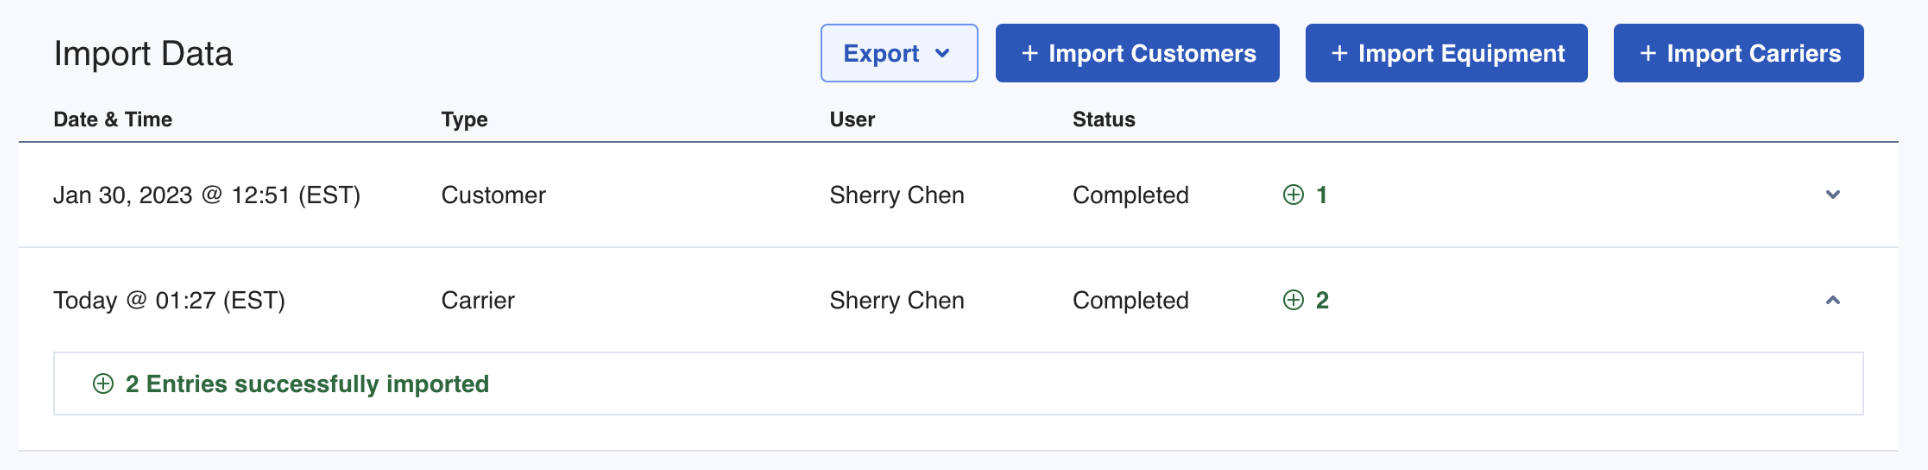 Once the carriers have been imported, the status will become Completed along with the uploaded date & time. You can expand it to see how many entries were successfully imported.